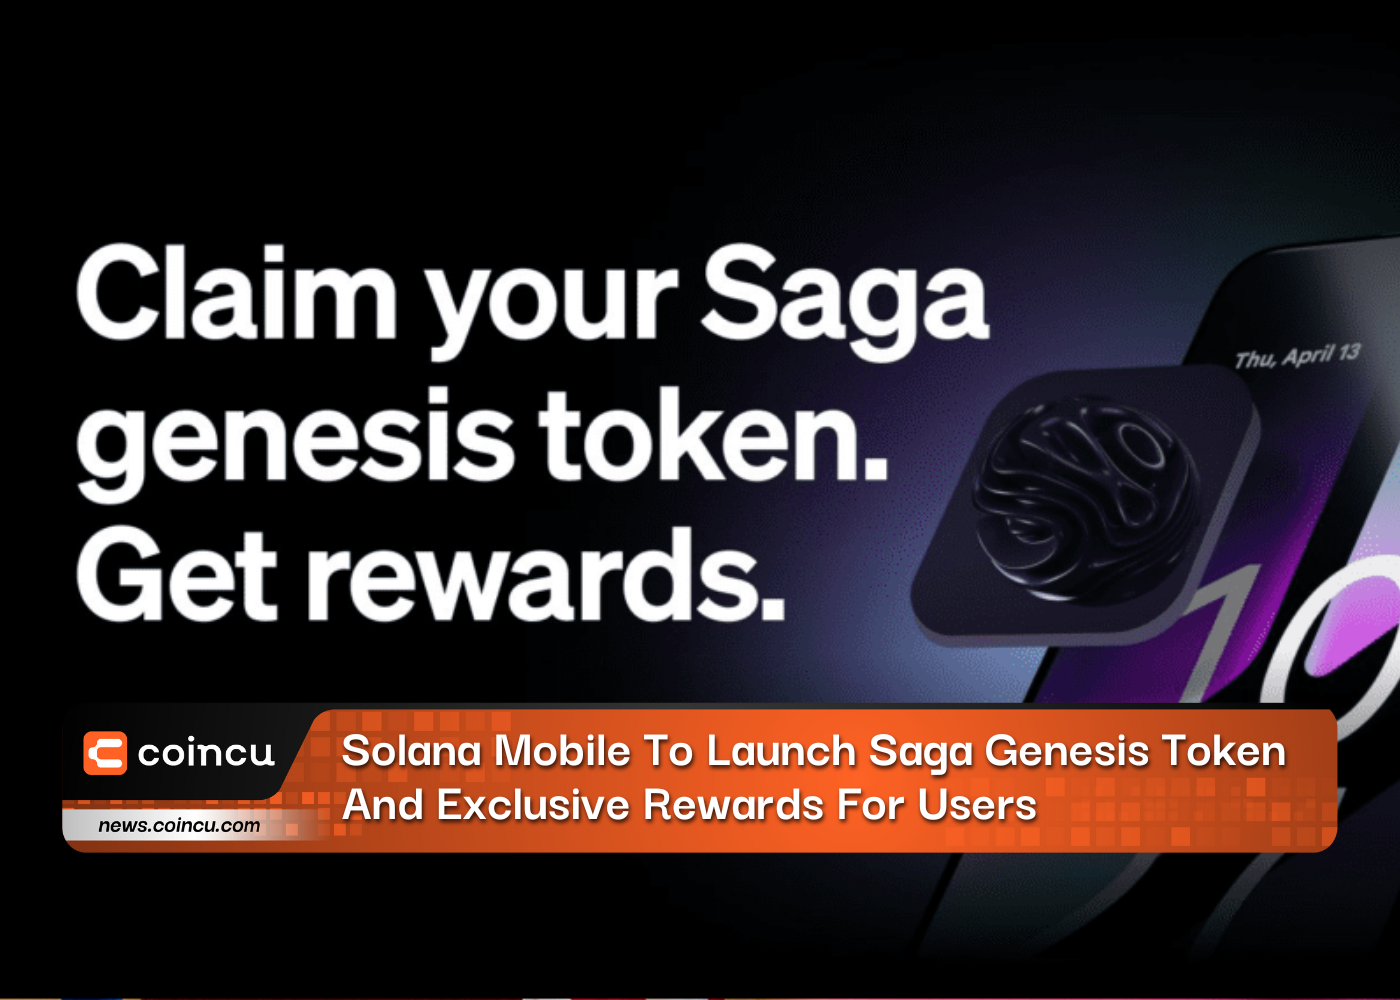 Solana Mobile To Launch Saga Genesis Token And Exclusive Rewards For Users